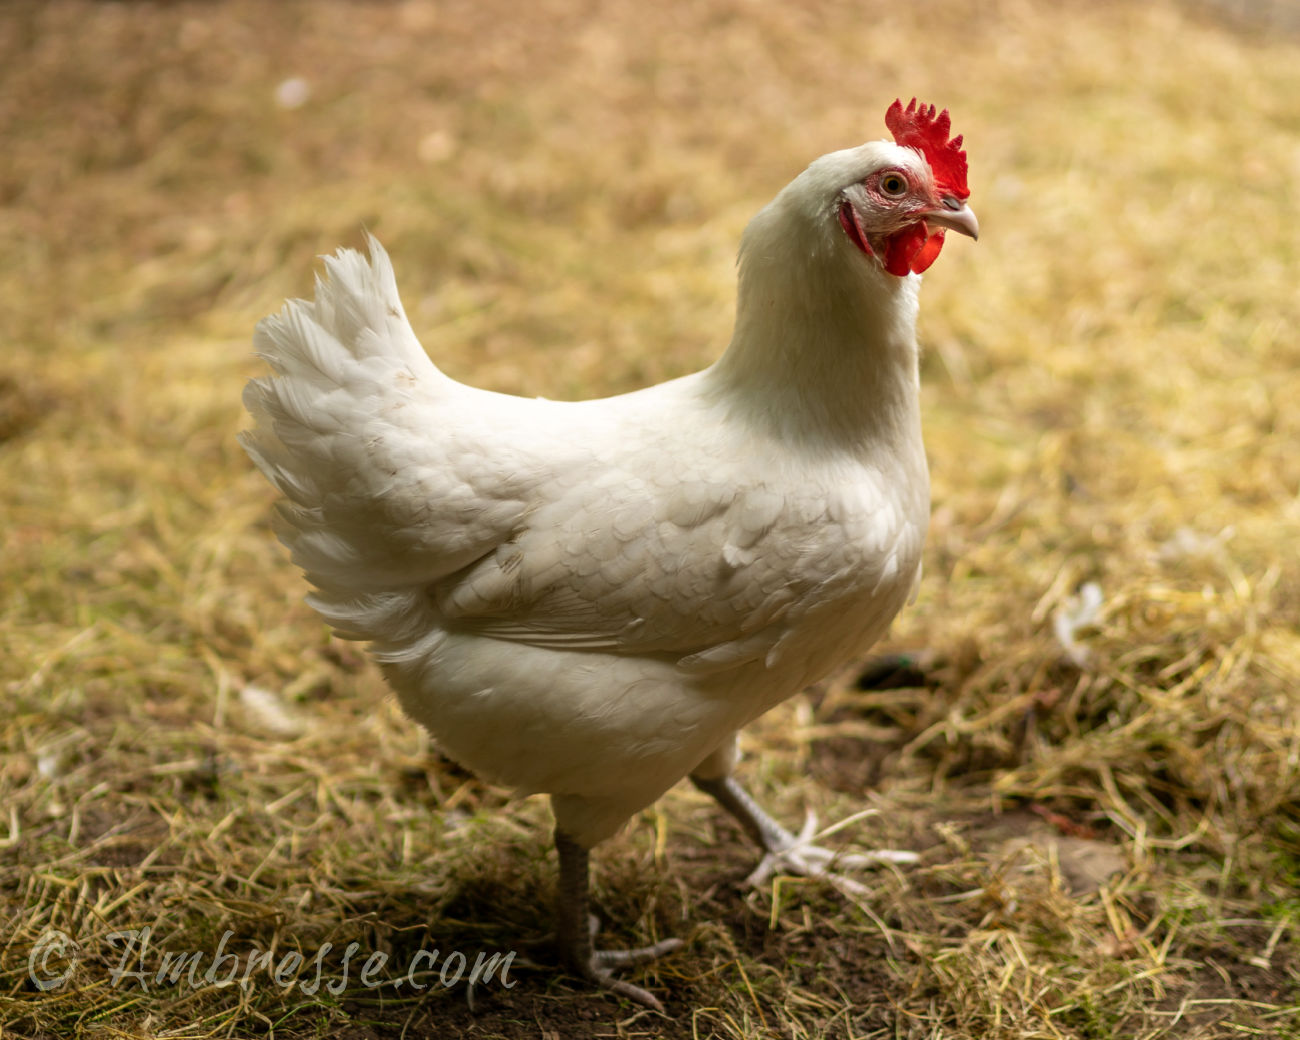 American Bresse hen, from Ambresse Acres in Washington State, USA.